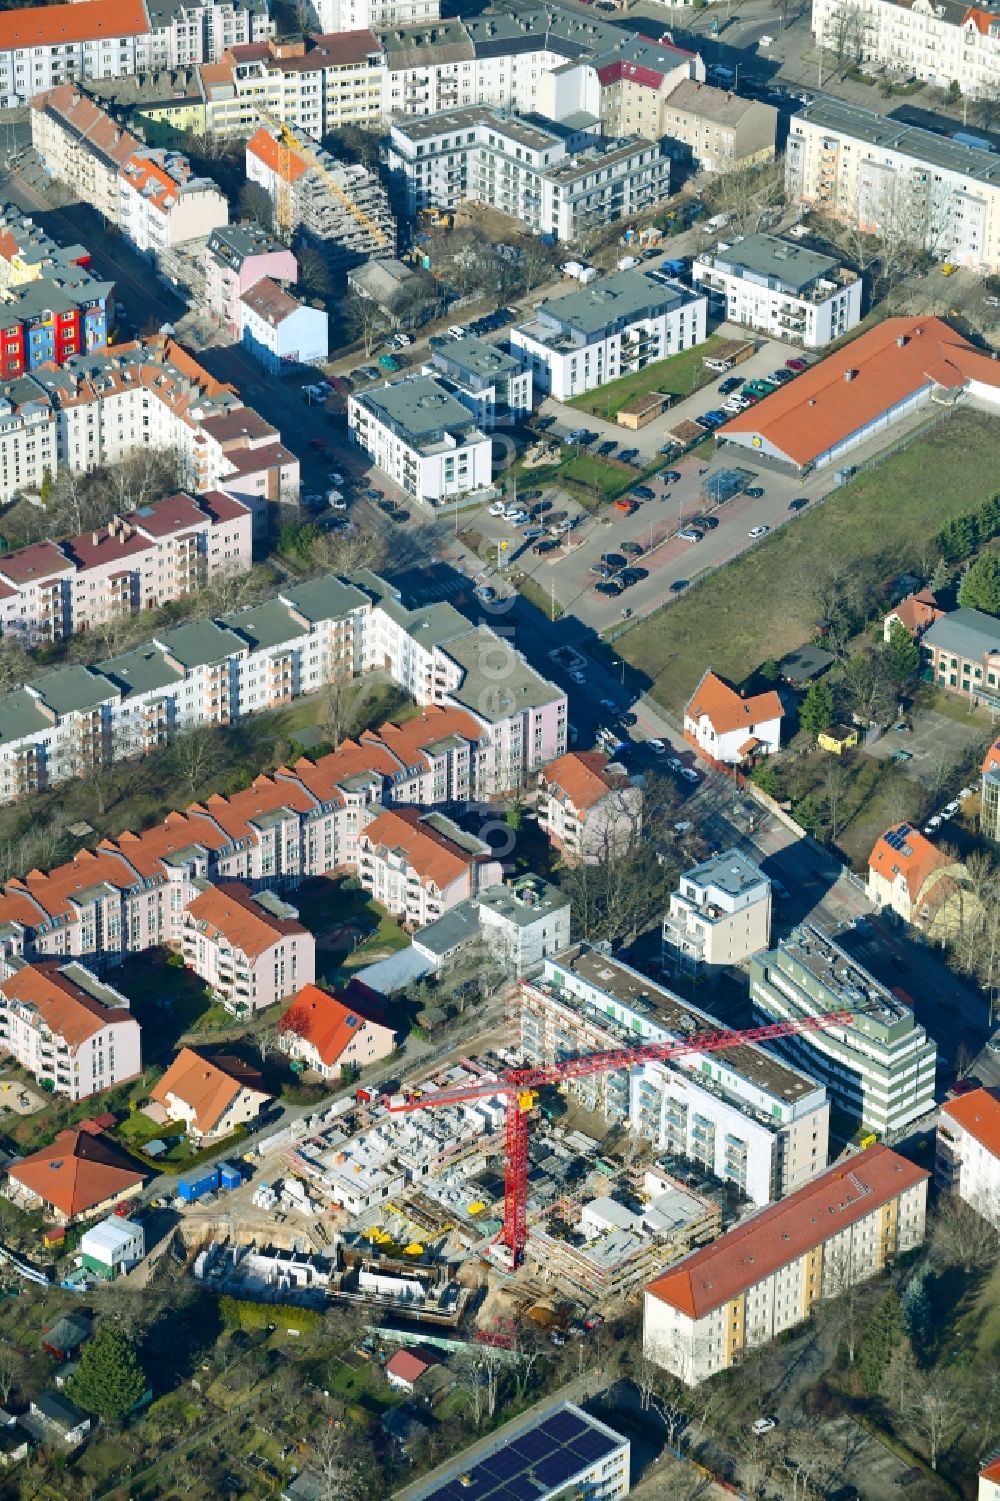 Berlin from above - Construction site to build a new multi-family residential complex along the Einbecker Strasse in the district Lichtenberg in Berlin, Germany